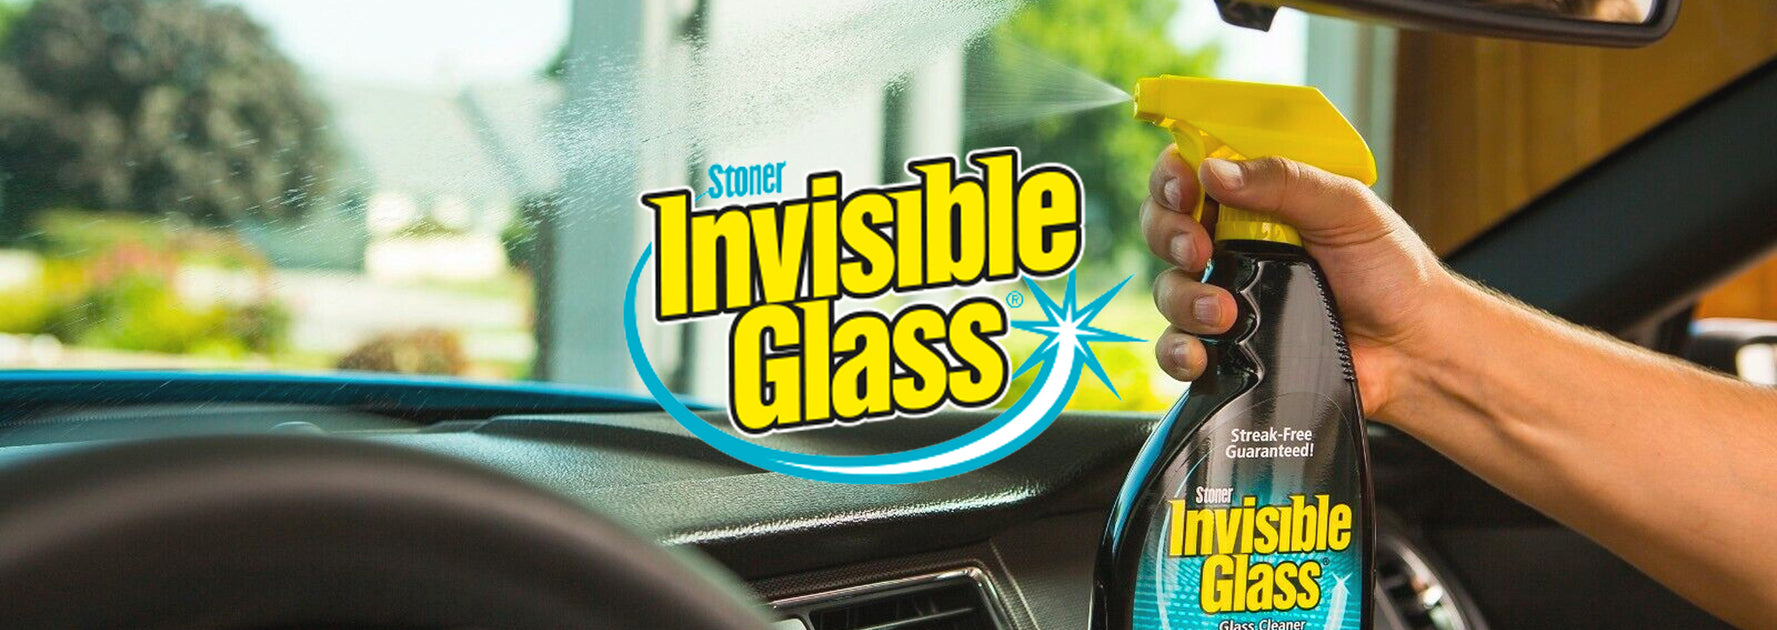 Fastest and Easiest Way to Clean Your Windshield, Invisible Glass Reach &  Clean Quick-Change Tool. 